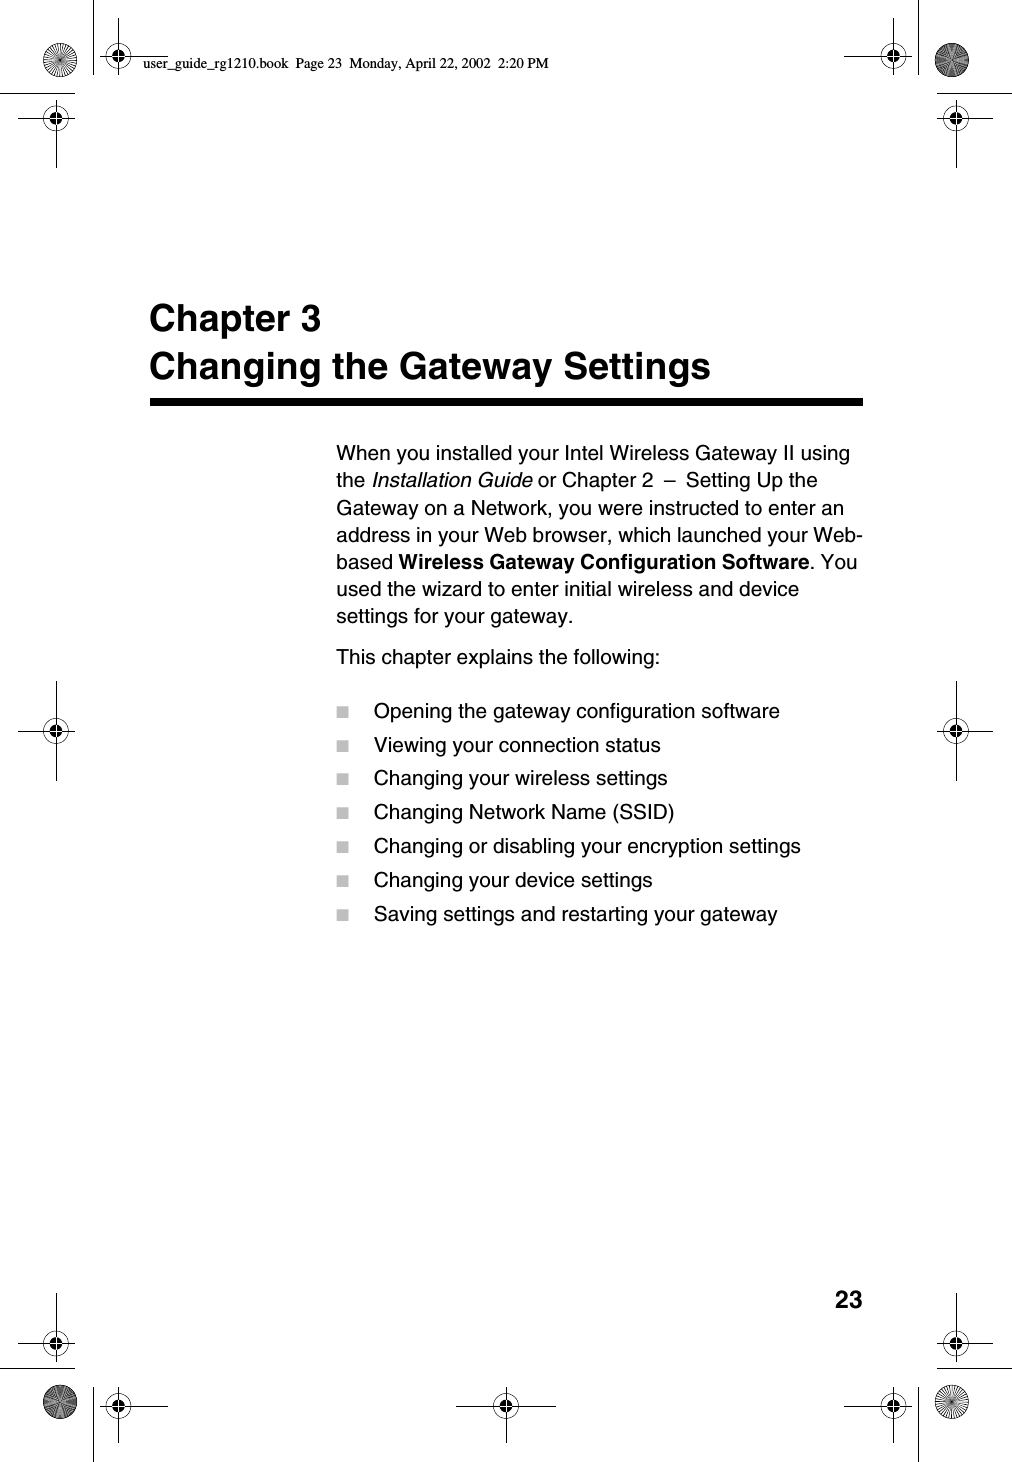 23Chapter 3Changing the Gateway SettingsWhen you installed your Intel Wireless Gateway II usingthe Installation Guide or Chapter 2 –Setting Up theGateway on a Network, you were instructed to enter anaddress in your Web browser, which launched your Web-based Wireless Gateway Configuration Software.Youused the wizard to enter initial wireless and devicesettings for your gateway.This chapter explains the following:■Opening the gateway configuration software■Viewing your connection status■Changing your wireless settings■Changing Network Name (SSID)■Changing or disabling your encryption settings■Changing your device settings■Saving settings and restarting your gatewayuser_guide_rg1210.book Page 23 Monday, April 22, 2002 2:20 PM